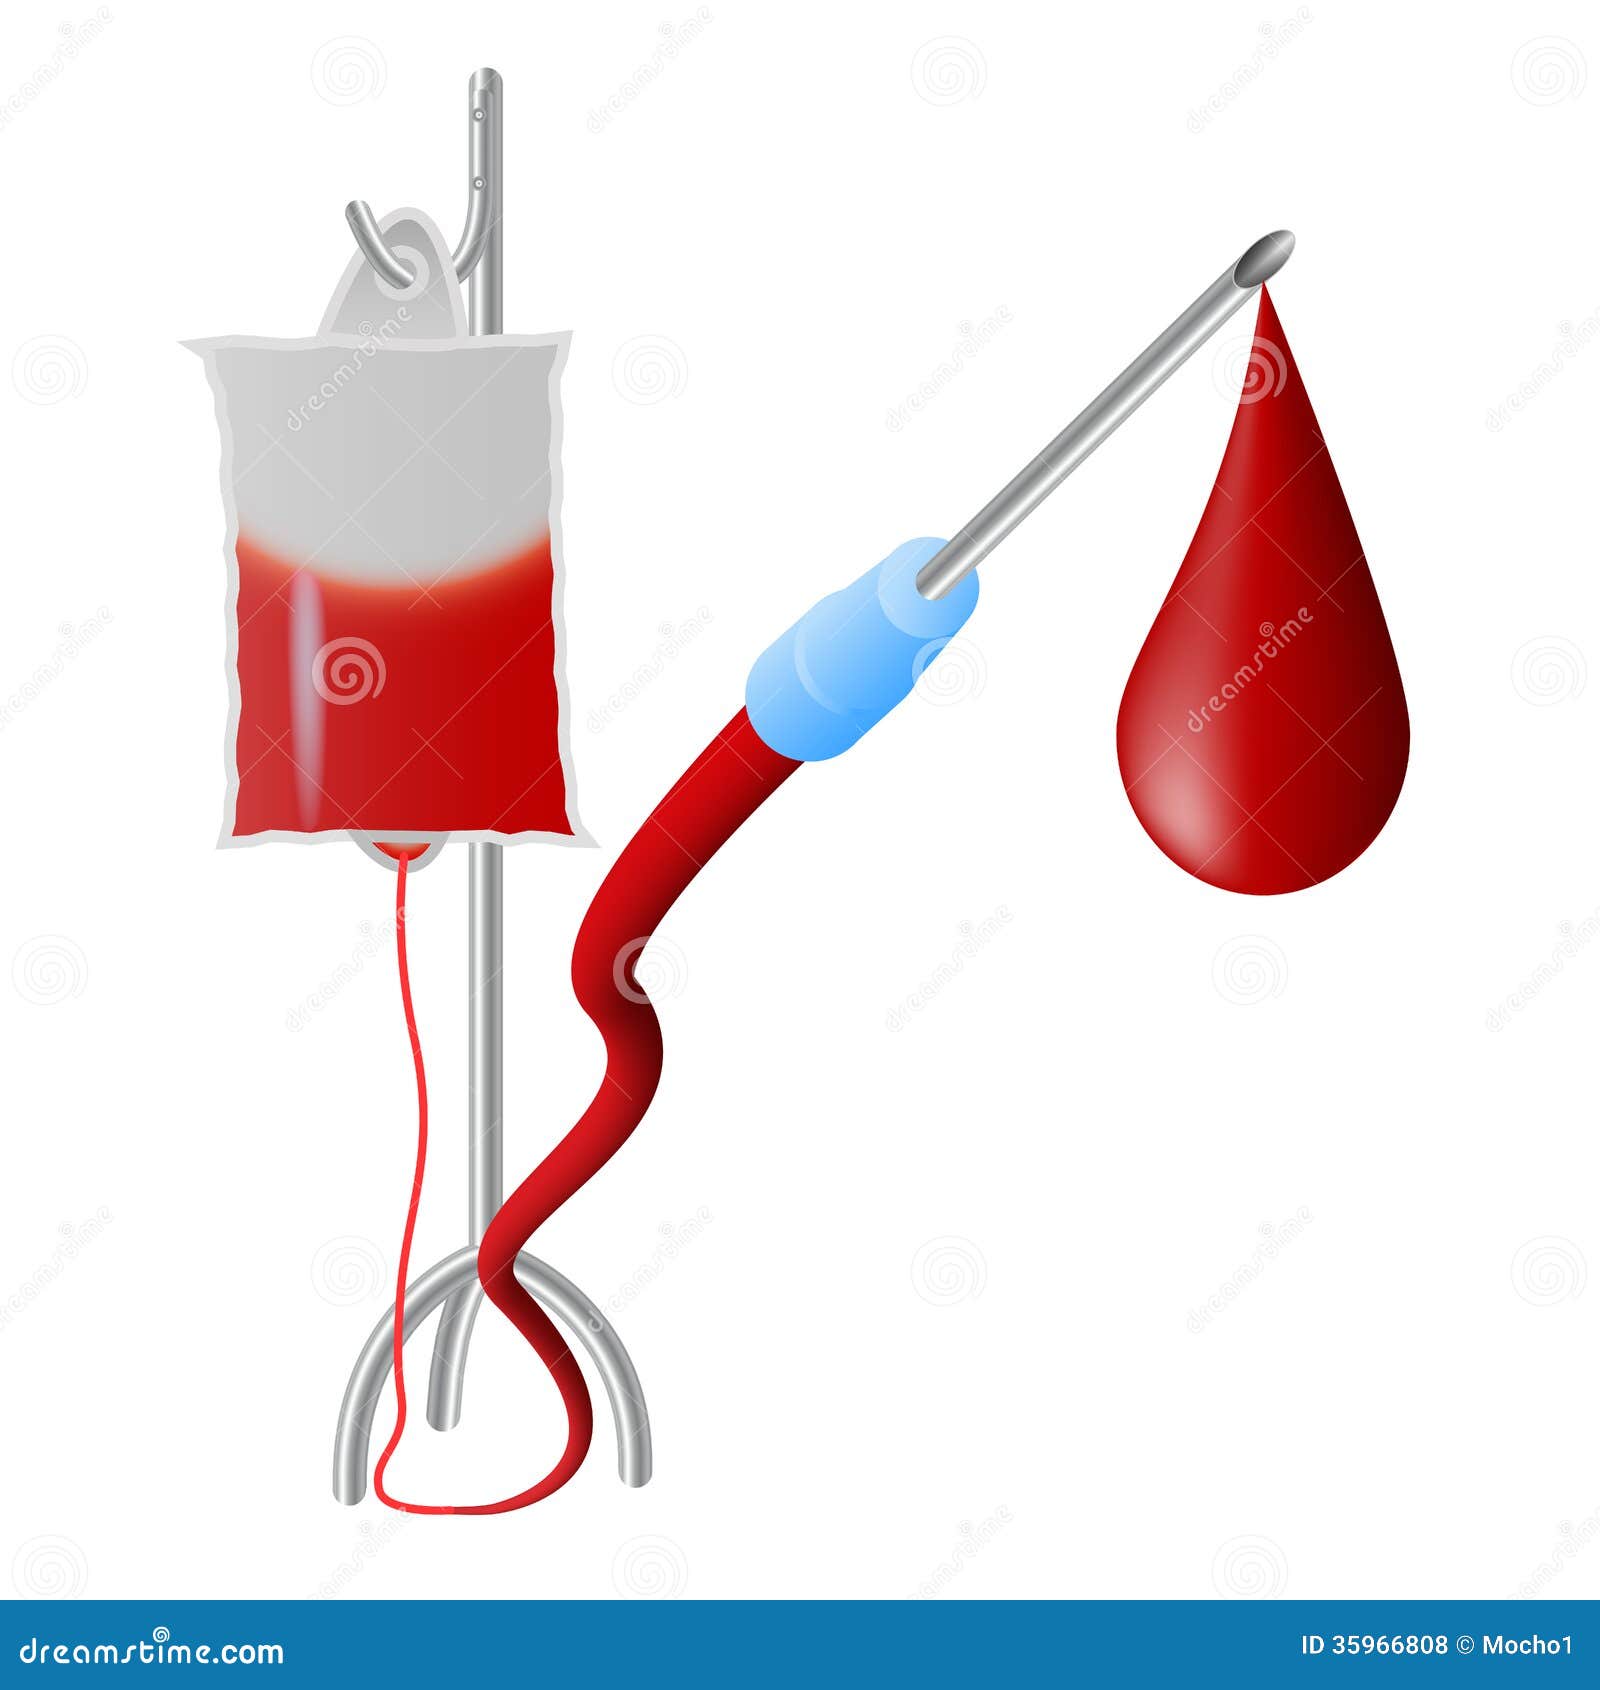 blood collection clipart - photo #11